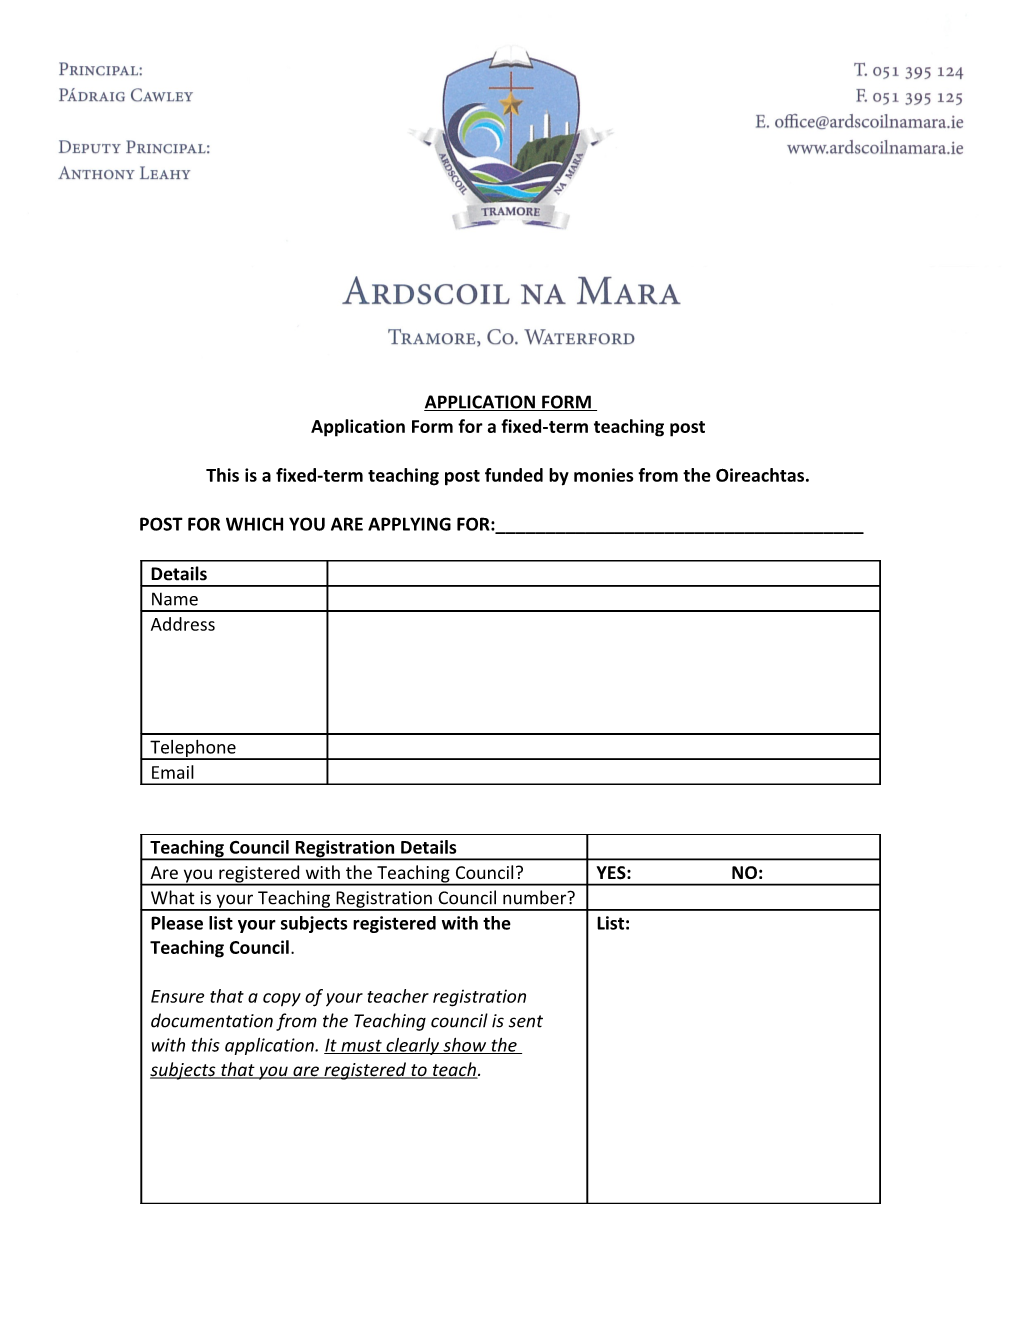 Application Form for a Fixed-Termteaching Post